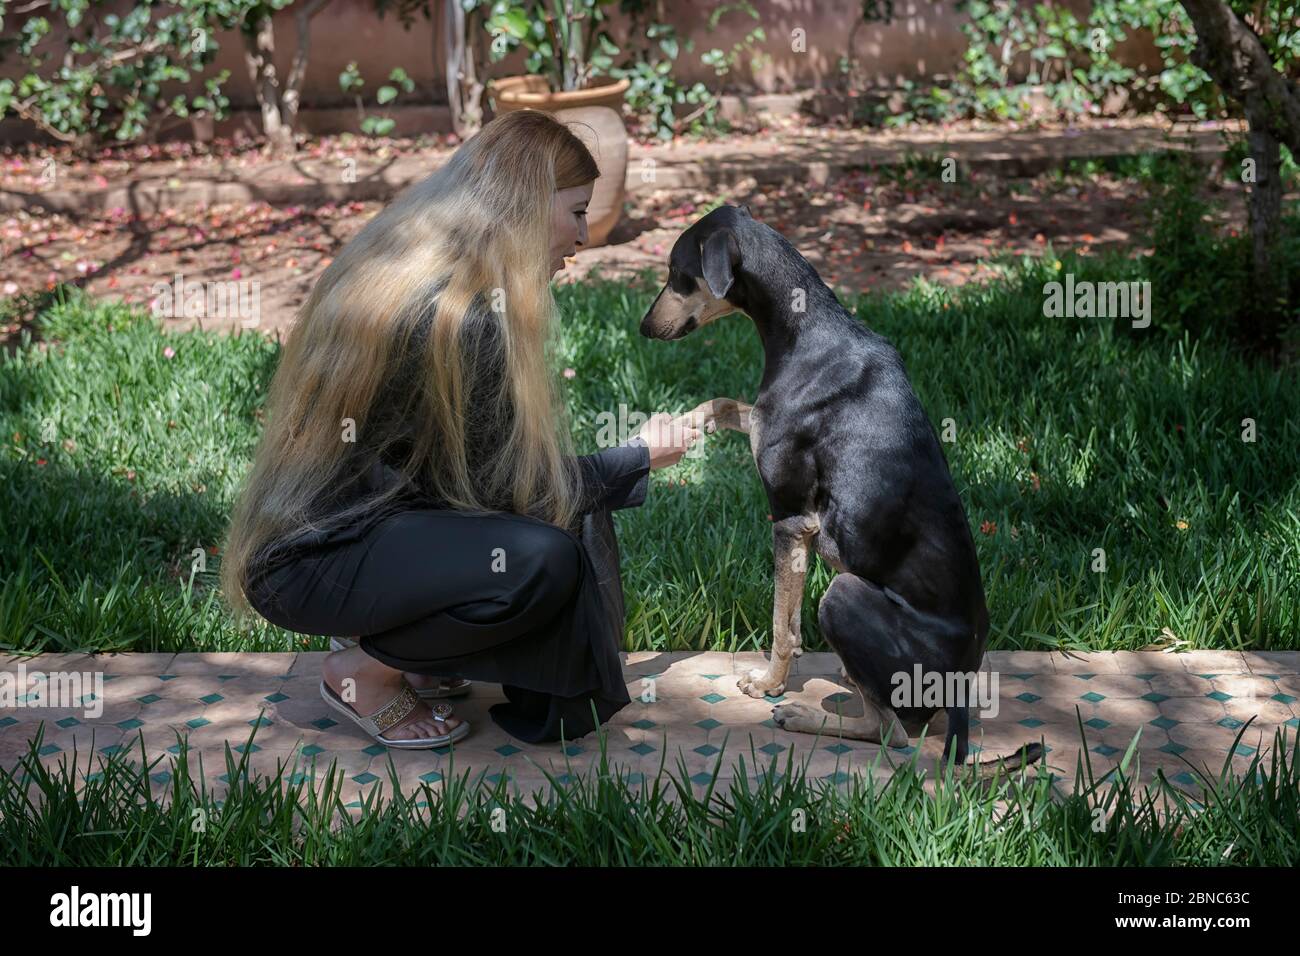 Beautiful Moroccan Arab Muslim woman with long blond hair is training obedience with a young black Sloughi dog (Arabian greyhound), inside a backyard Stock Photo